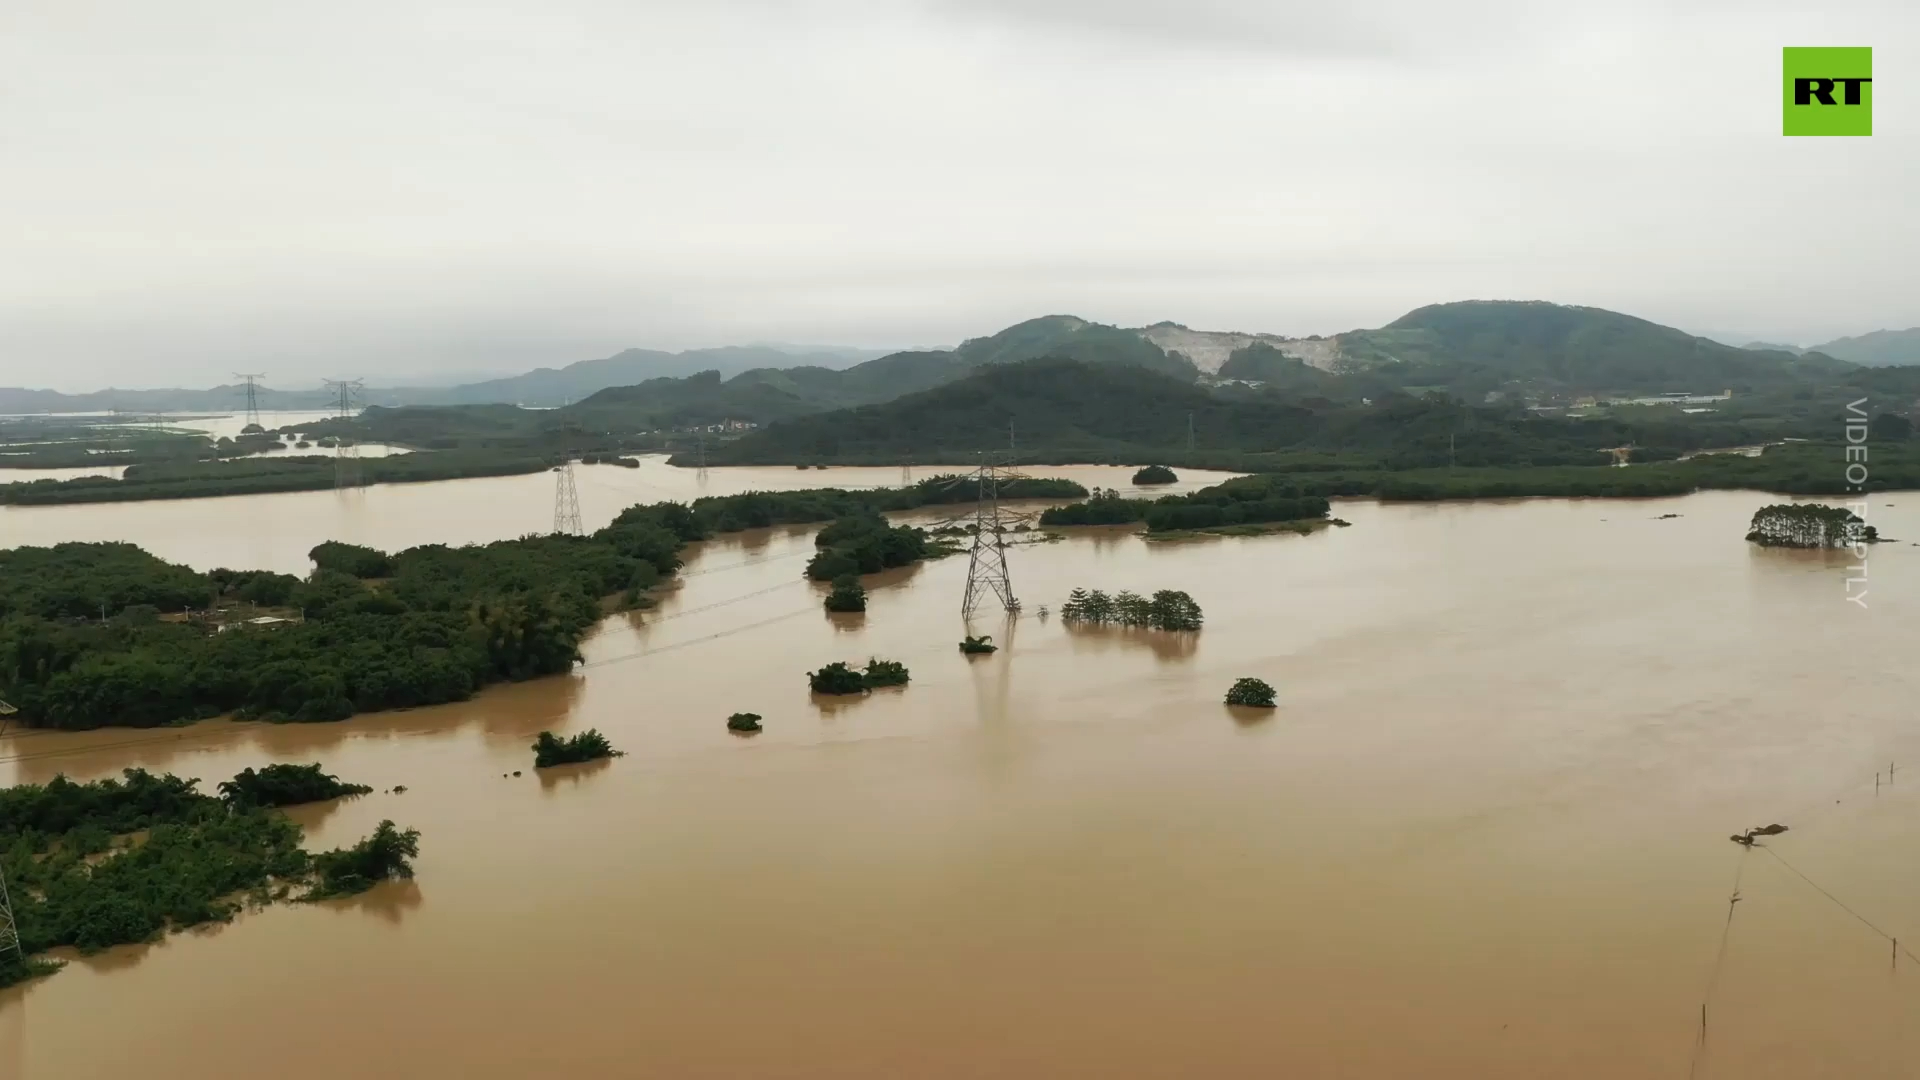 Gargantuan scale of Guangdong flooding captured by drone